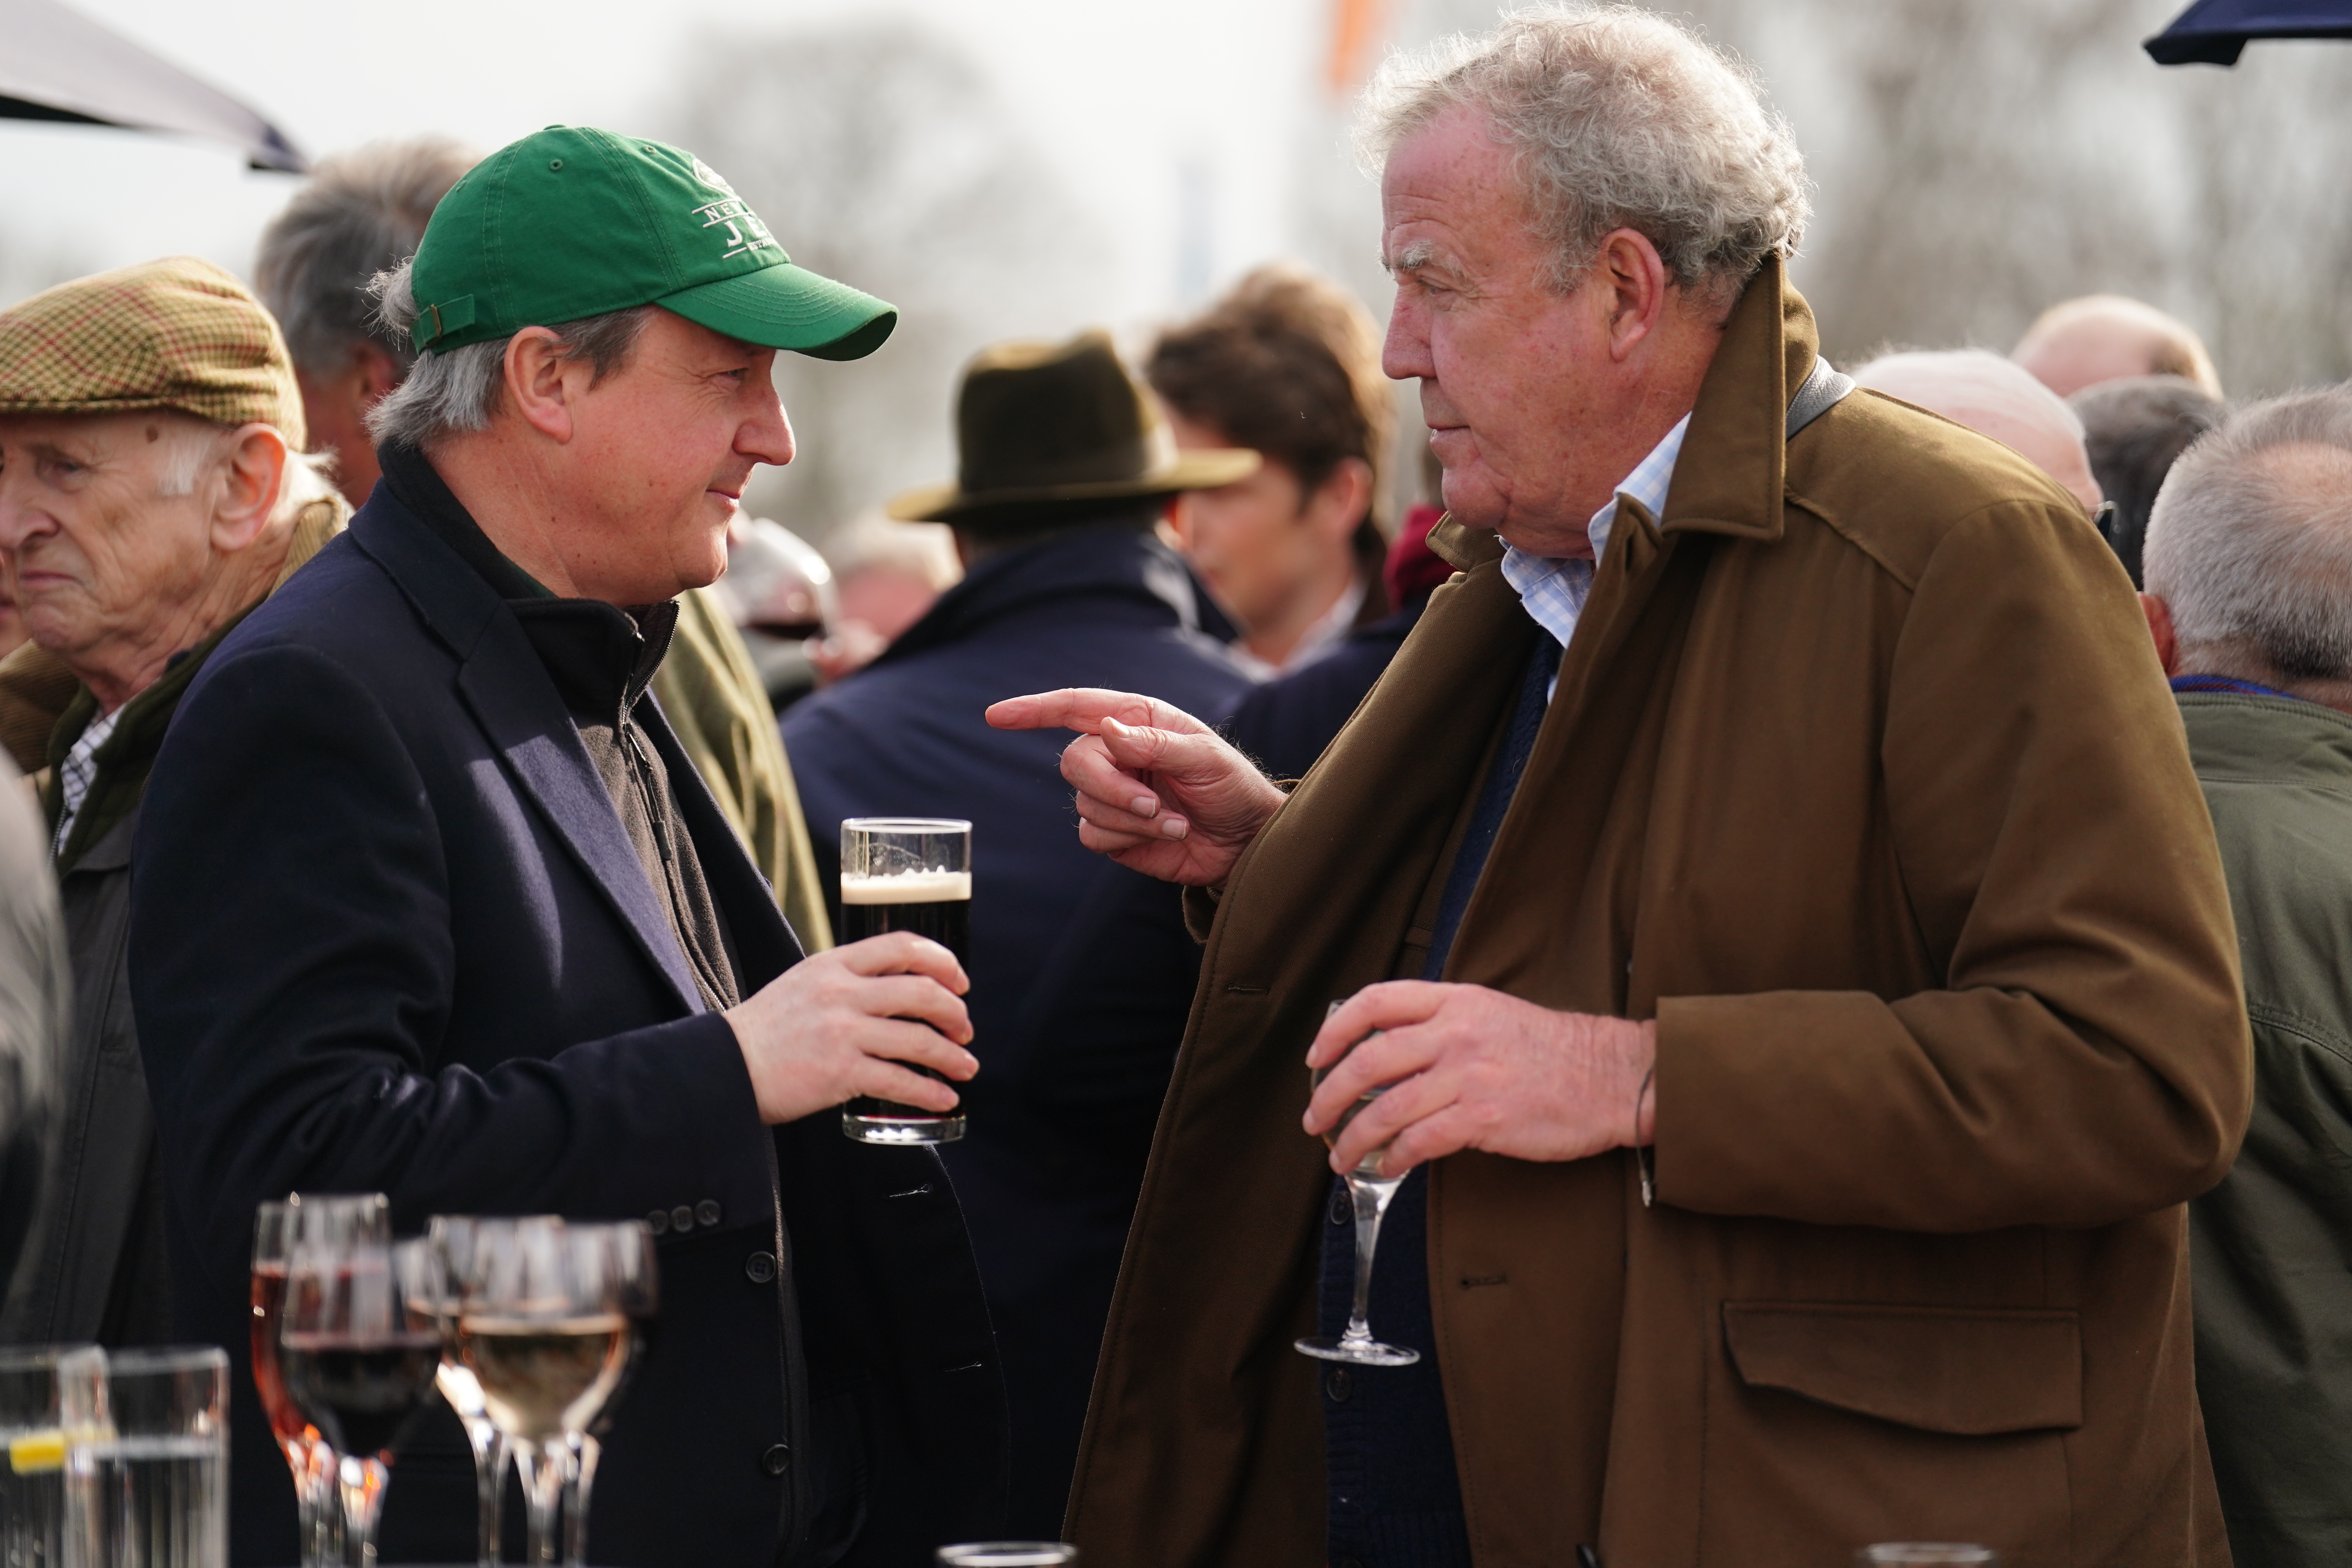 Jeremy Clarkson and former PM David Cameron seen at Wilderness Festival in the Cotswolds